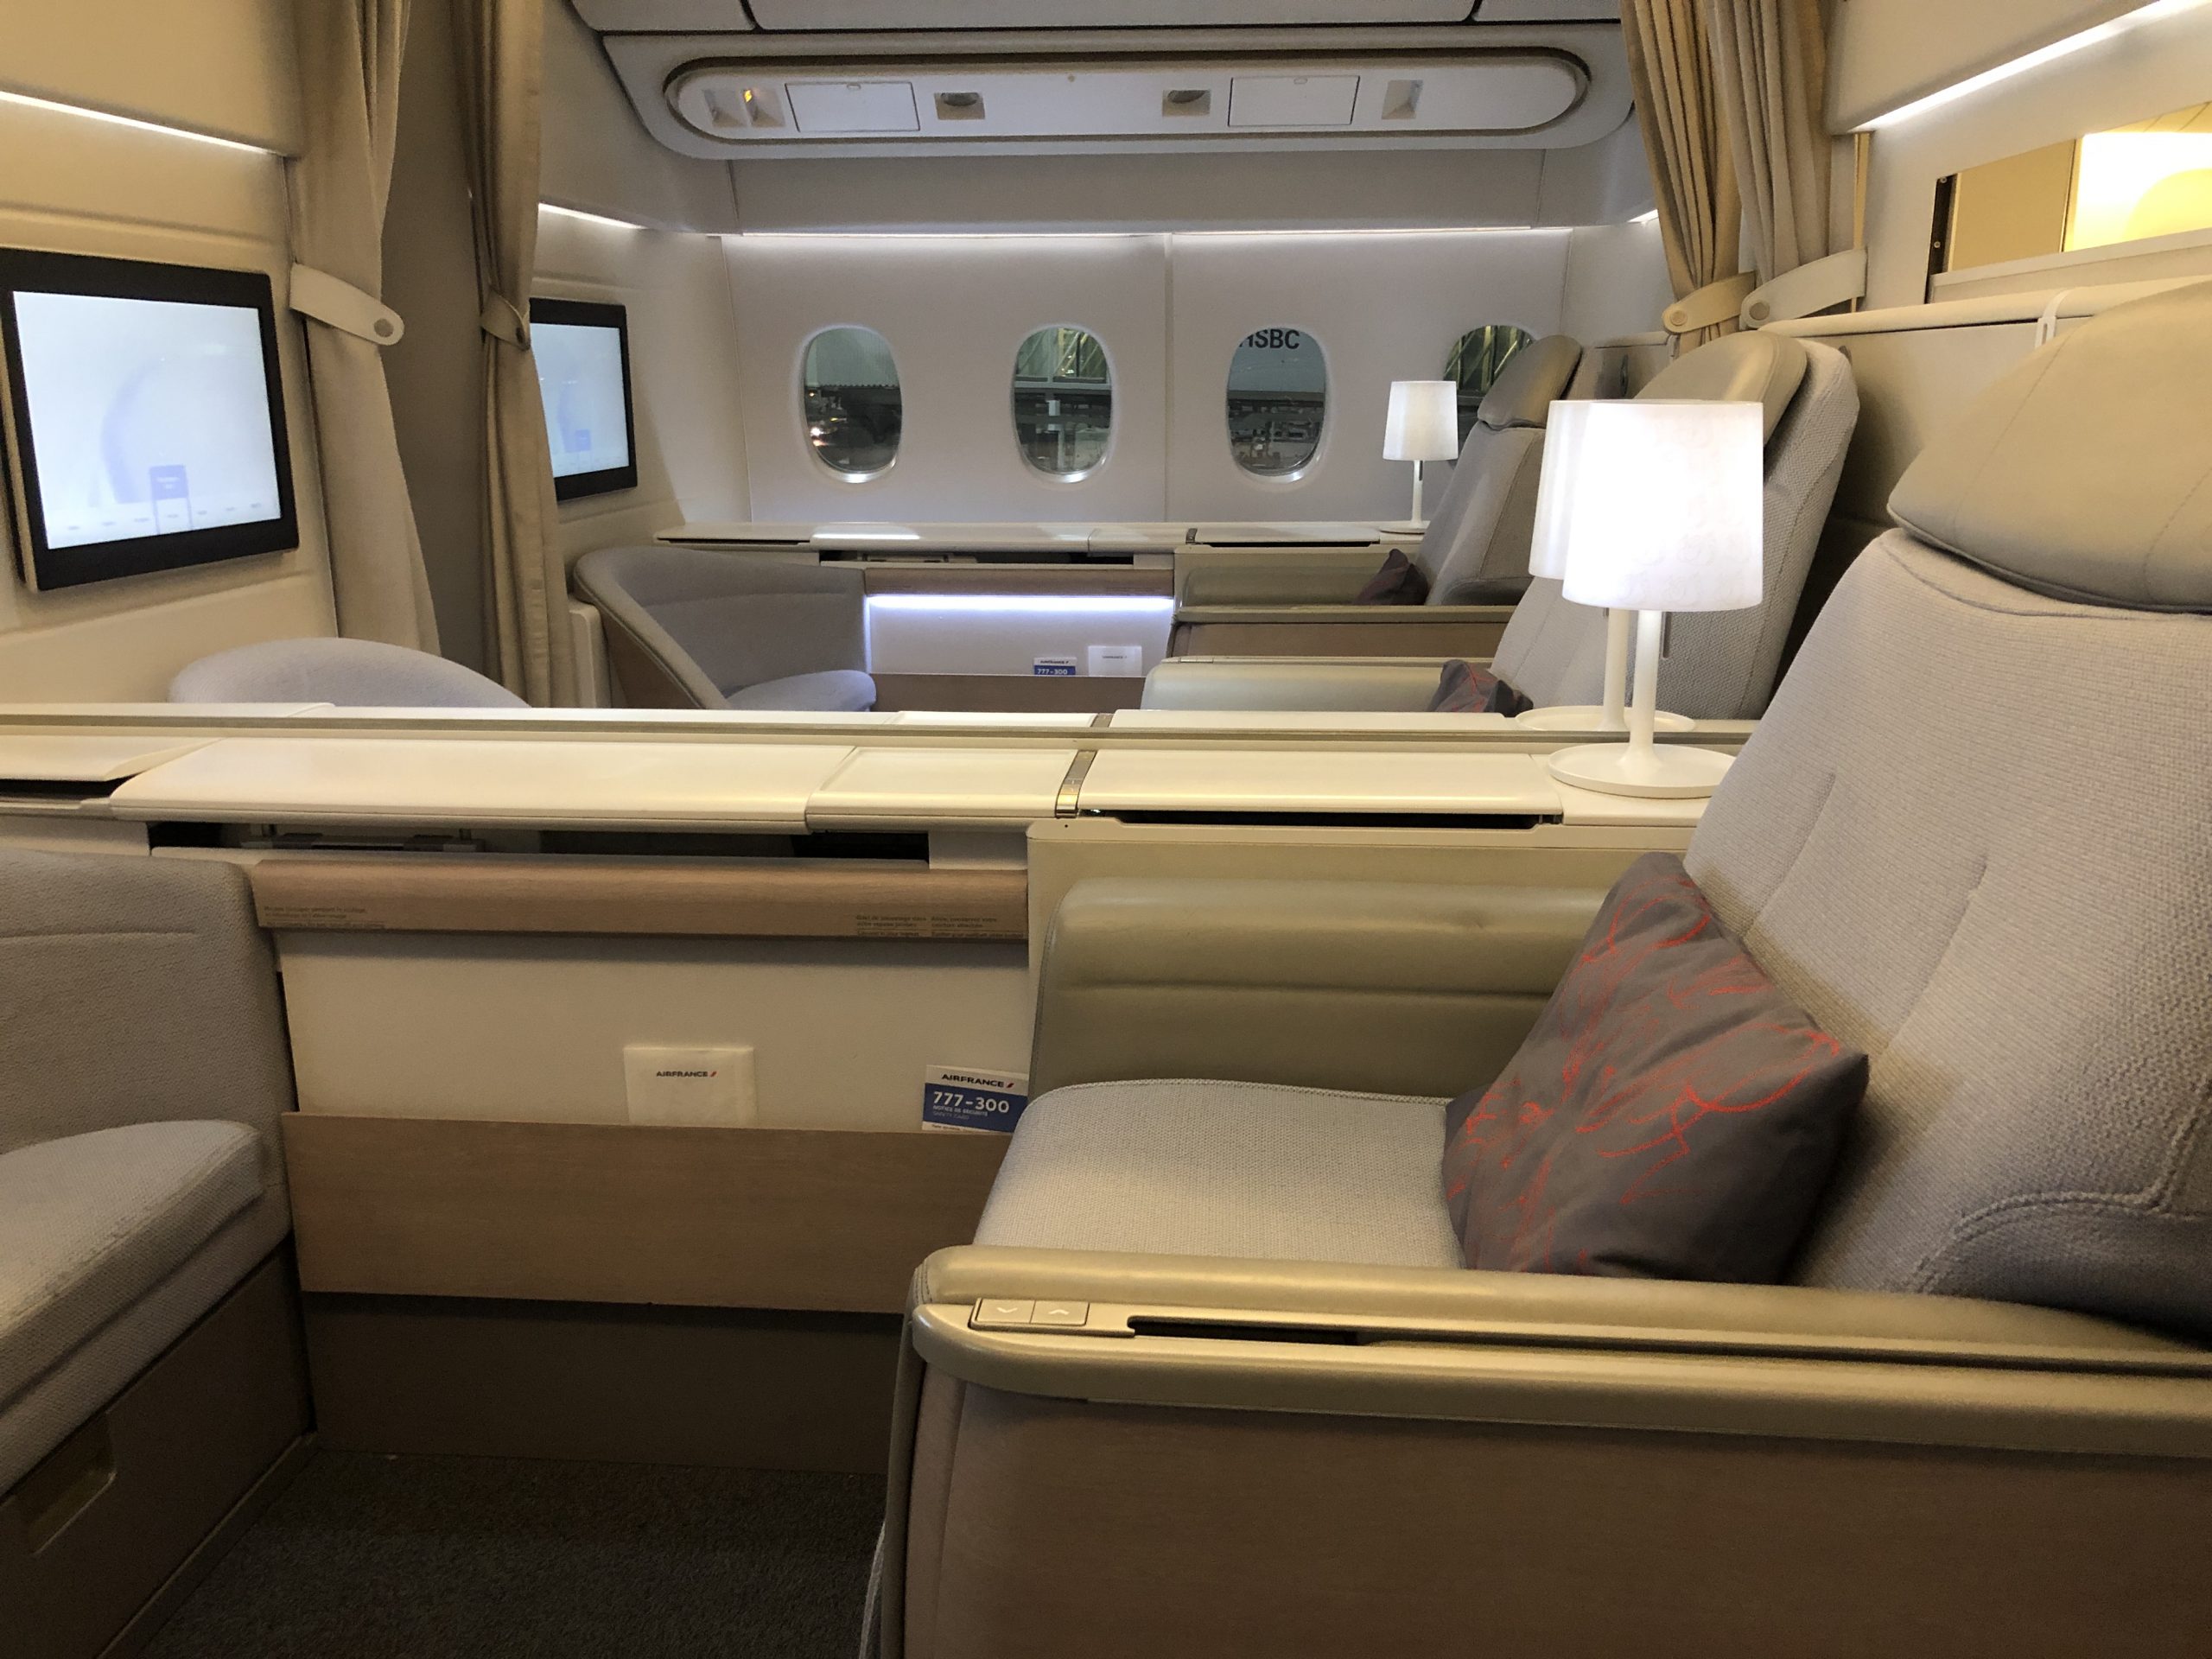 First Class Review : エールフランス航空(AF) AF655 ドバイ(DXB) – パリ(CDG) ラ・プルミエール(La Première)